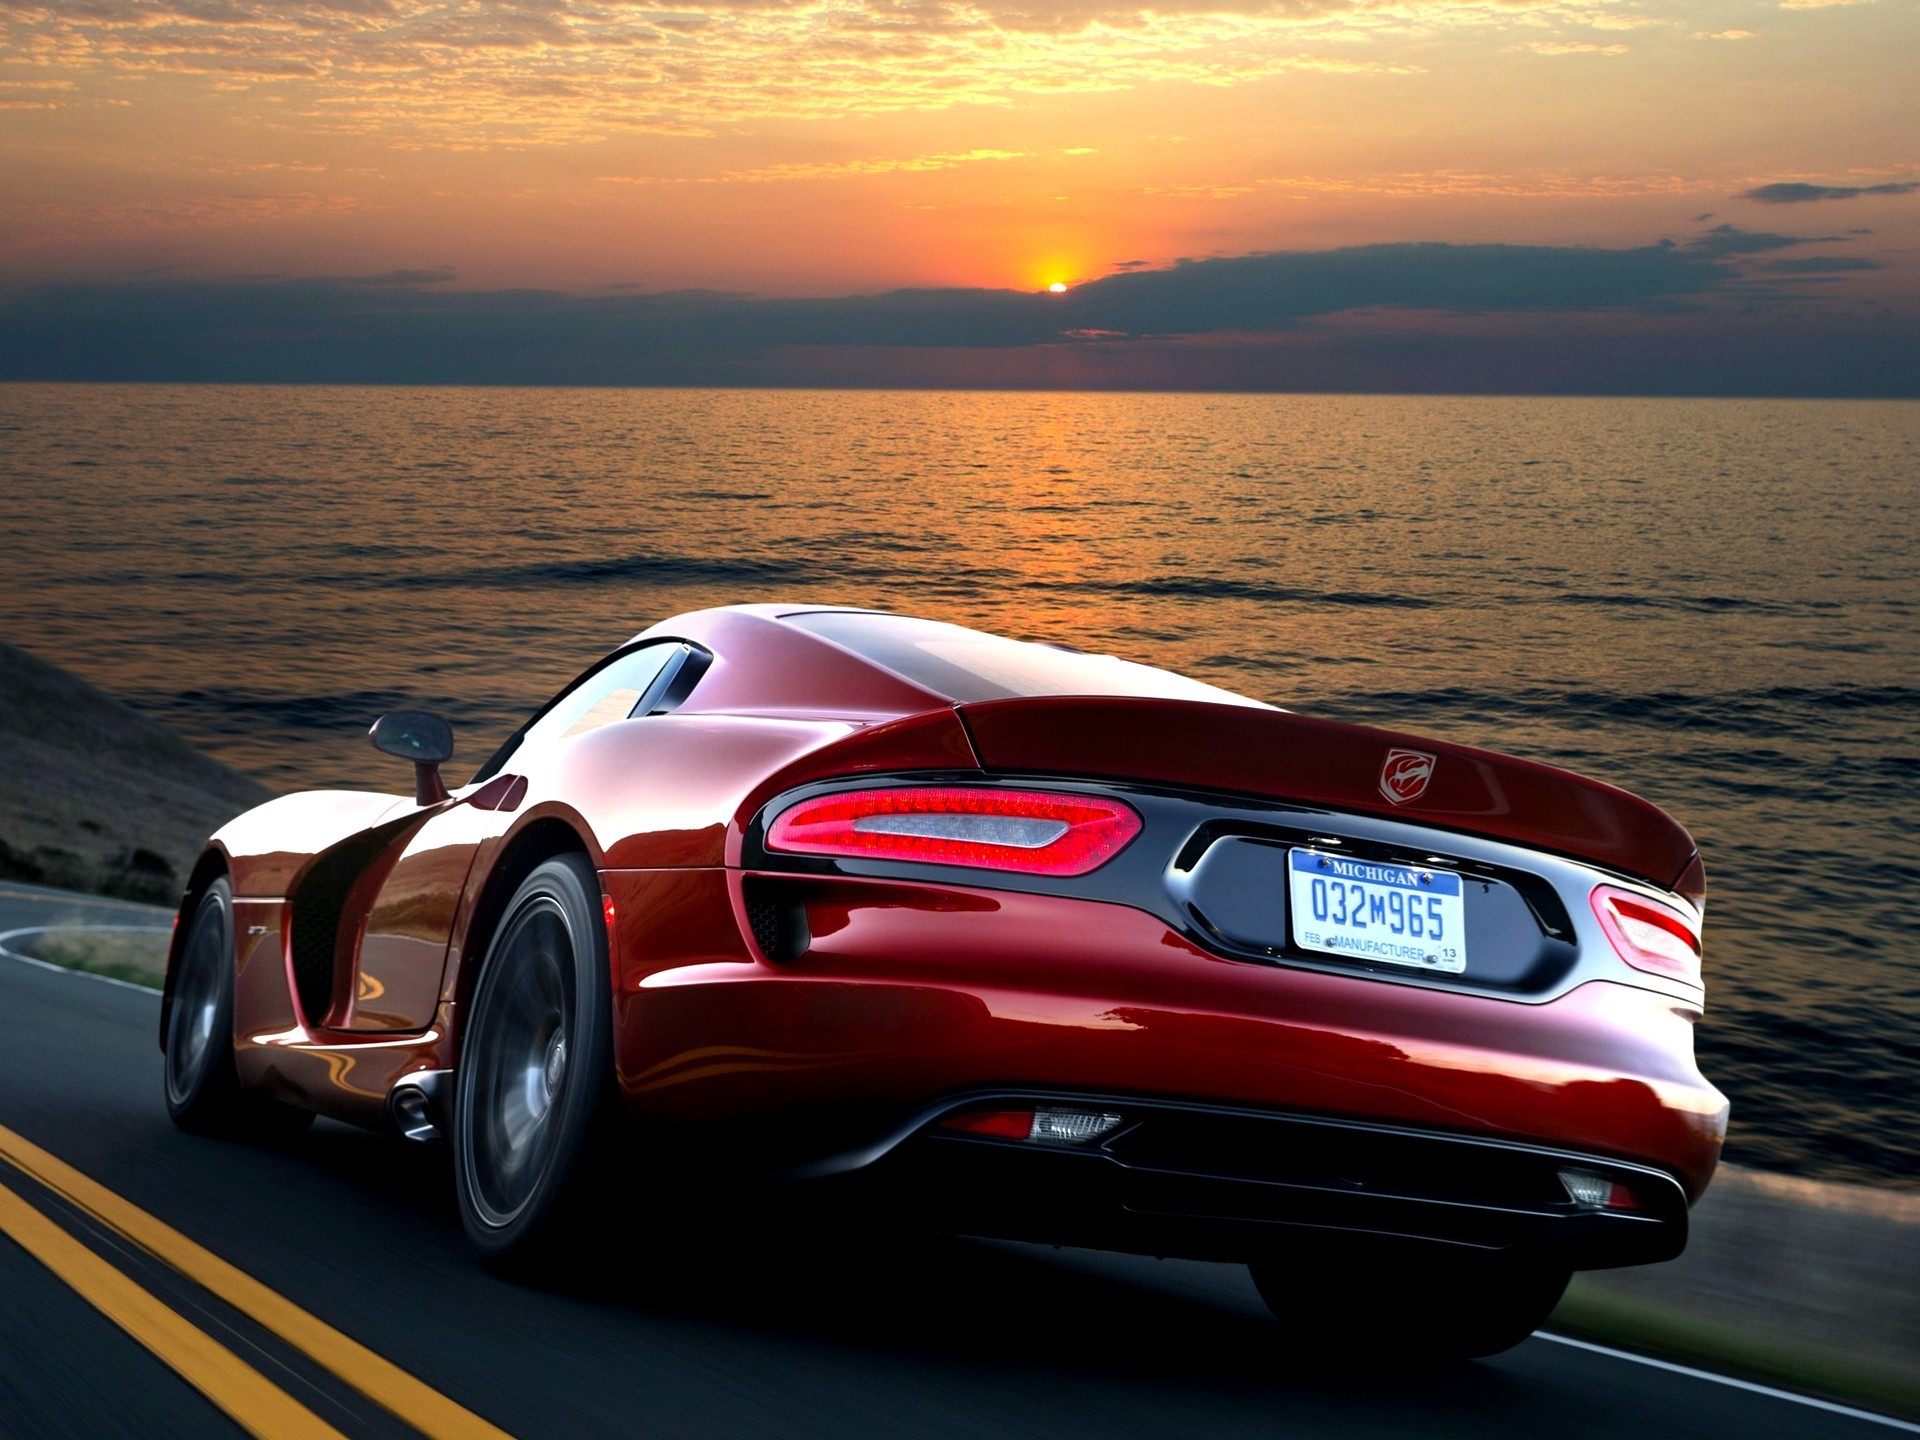 132090 download wallpaper cars, dodge, 2012, viper, gts, srt screensavers and pictures for free